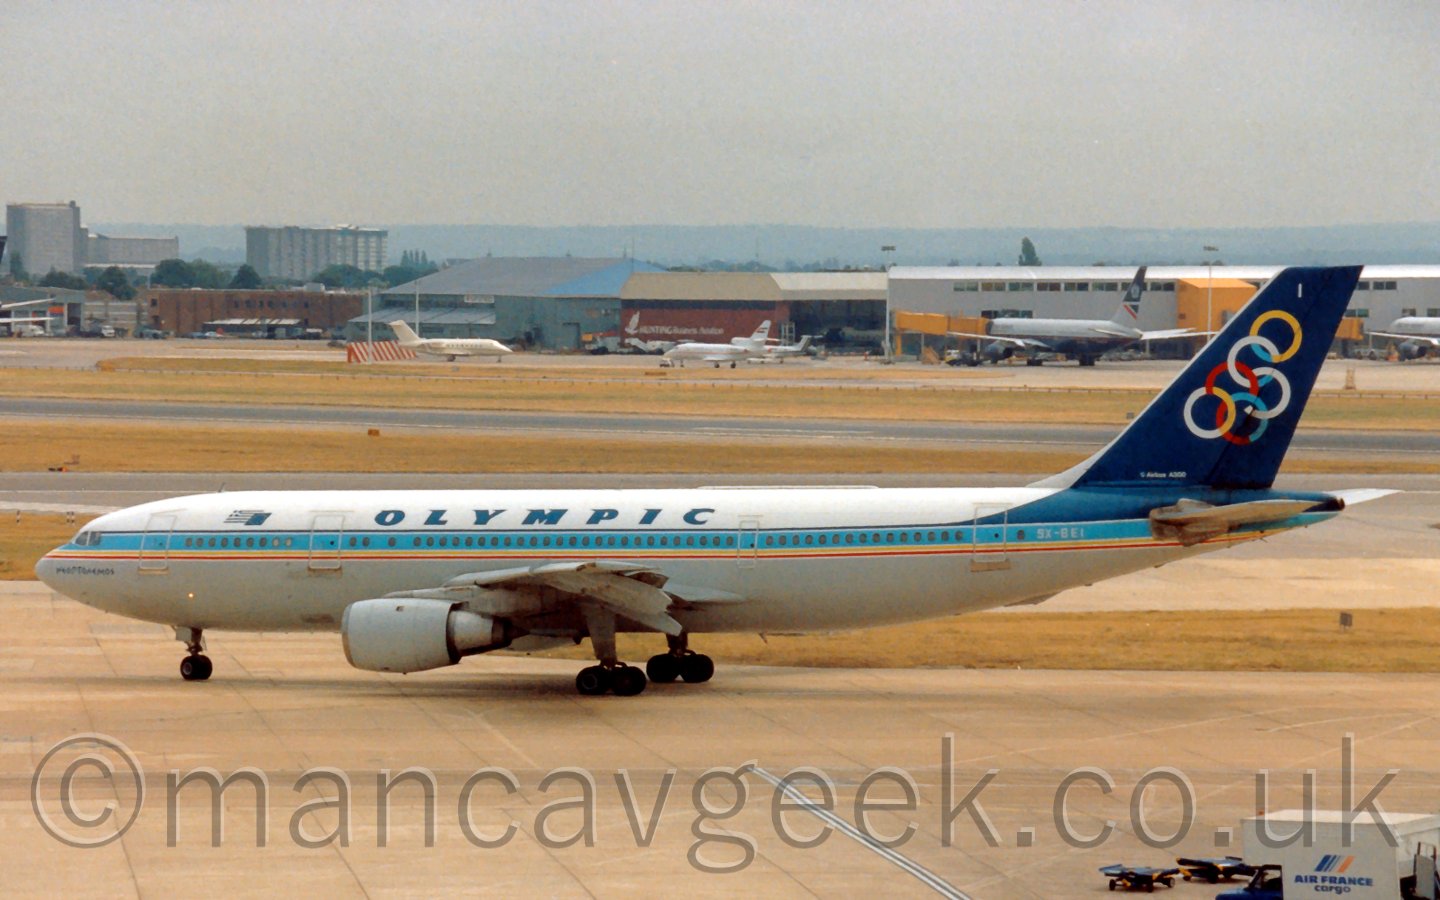 Side view of a twin engined jet airliner taxiing from right to left. The plane has a white top half with a grey belly, seperated with a thick light blue stripe with thinner yellow and red stripes at the bottom, and a dark blue stripe at the top, sweeping up in to the tail. There are blue "Olympic" titles on the upper fuselage. In the background, a grey terminal with yellow airbridges, some attached to grey planes, is on the upper right of the frame, and with a couple of hangars, one blue, one brown, with some bizjets parked in front. Hi-rise buildings in the distance dominate the left of the frame, under a grey sky.